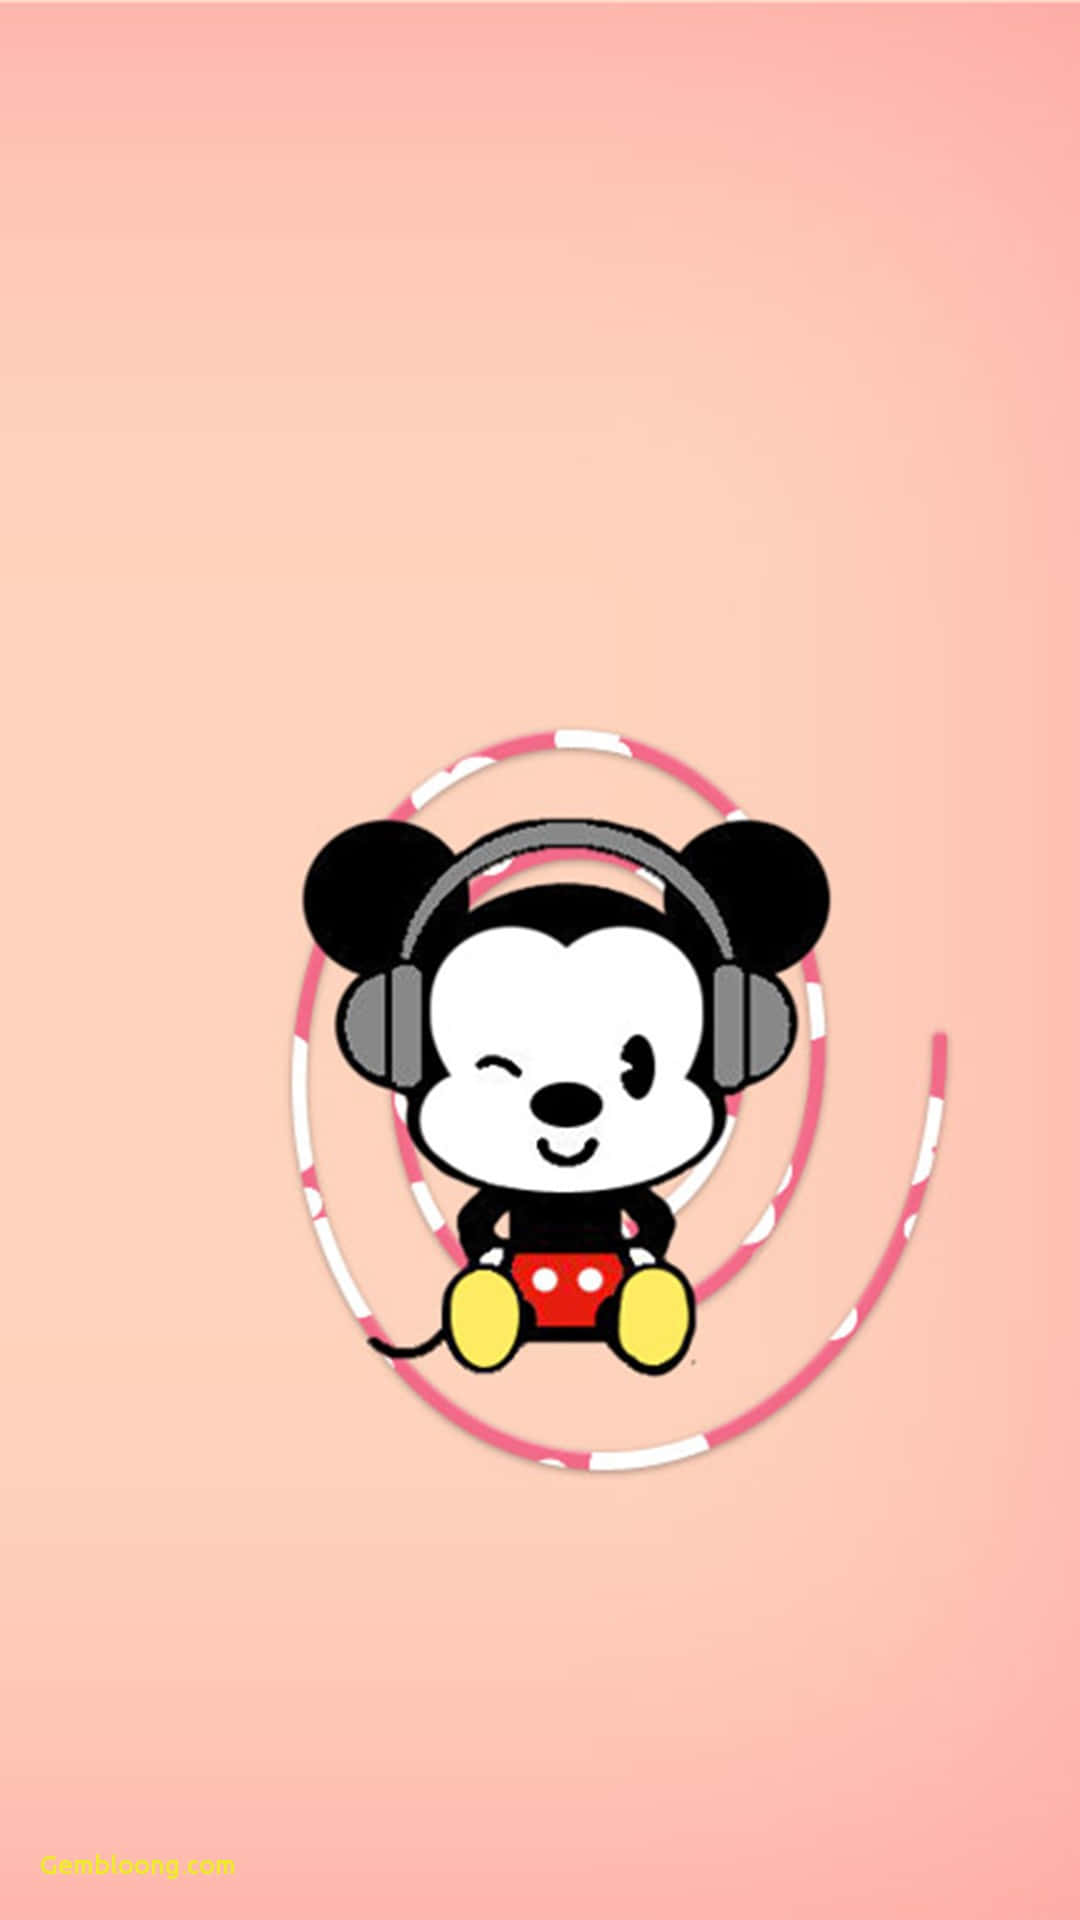 Mickeymouse Ist Cool! Wallpaper